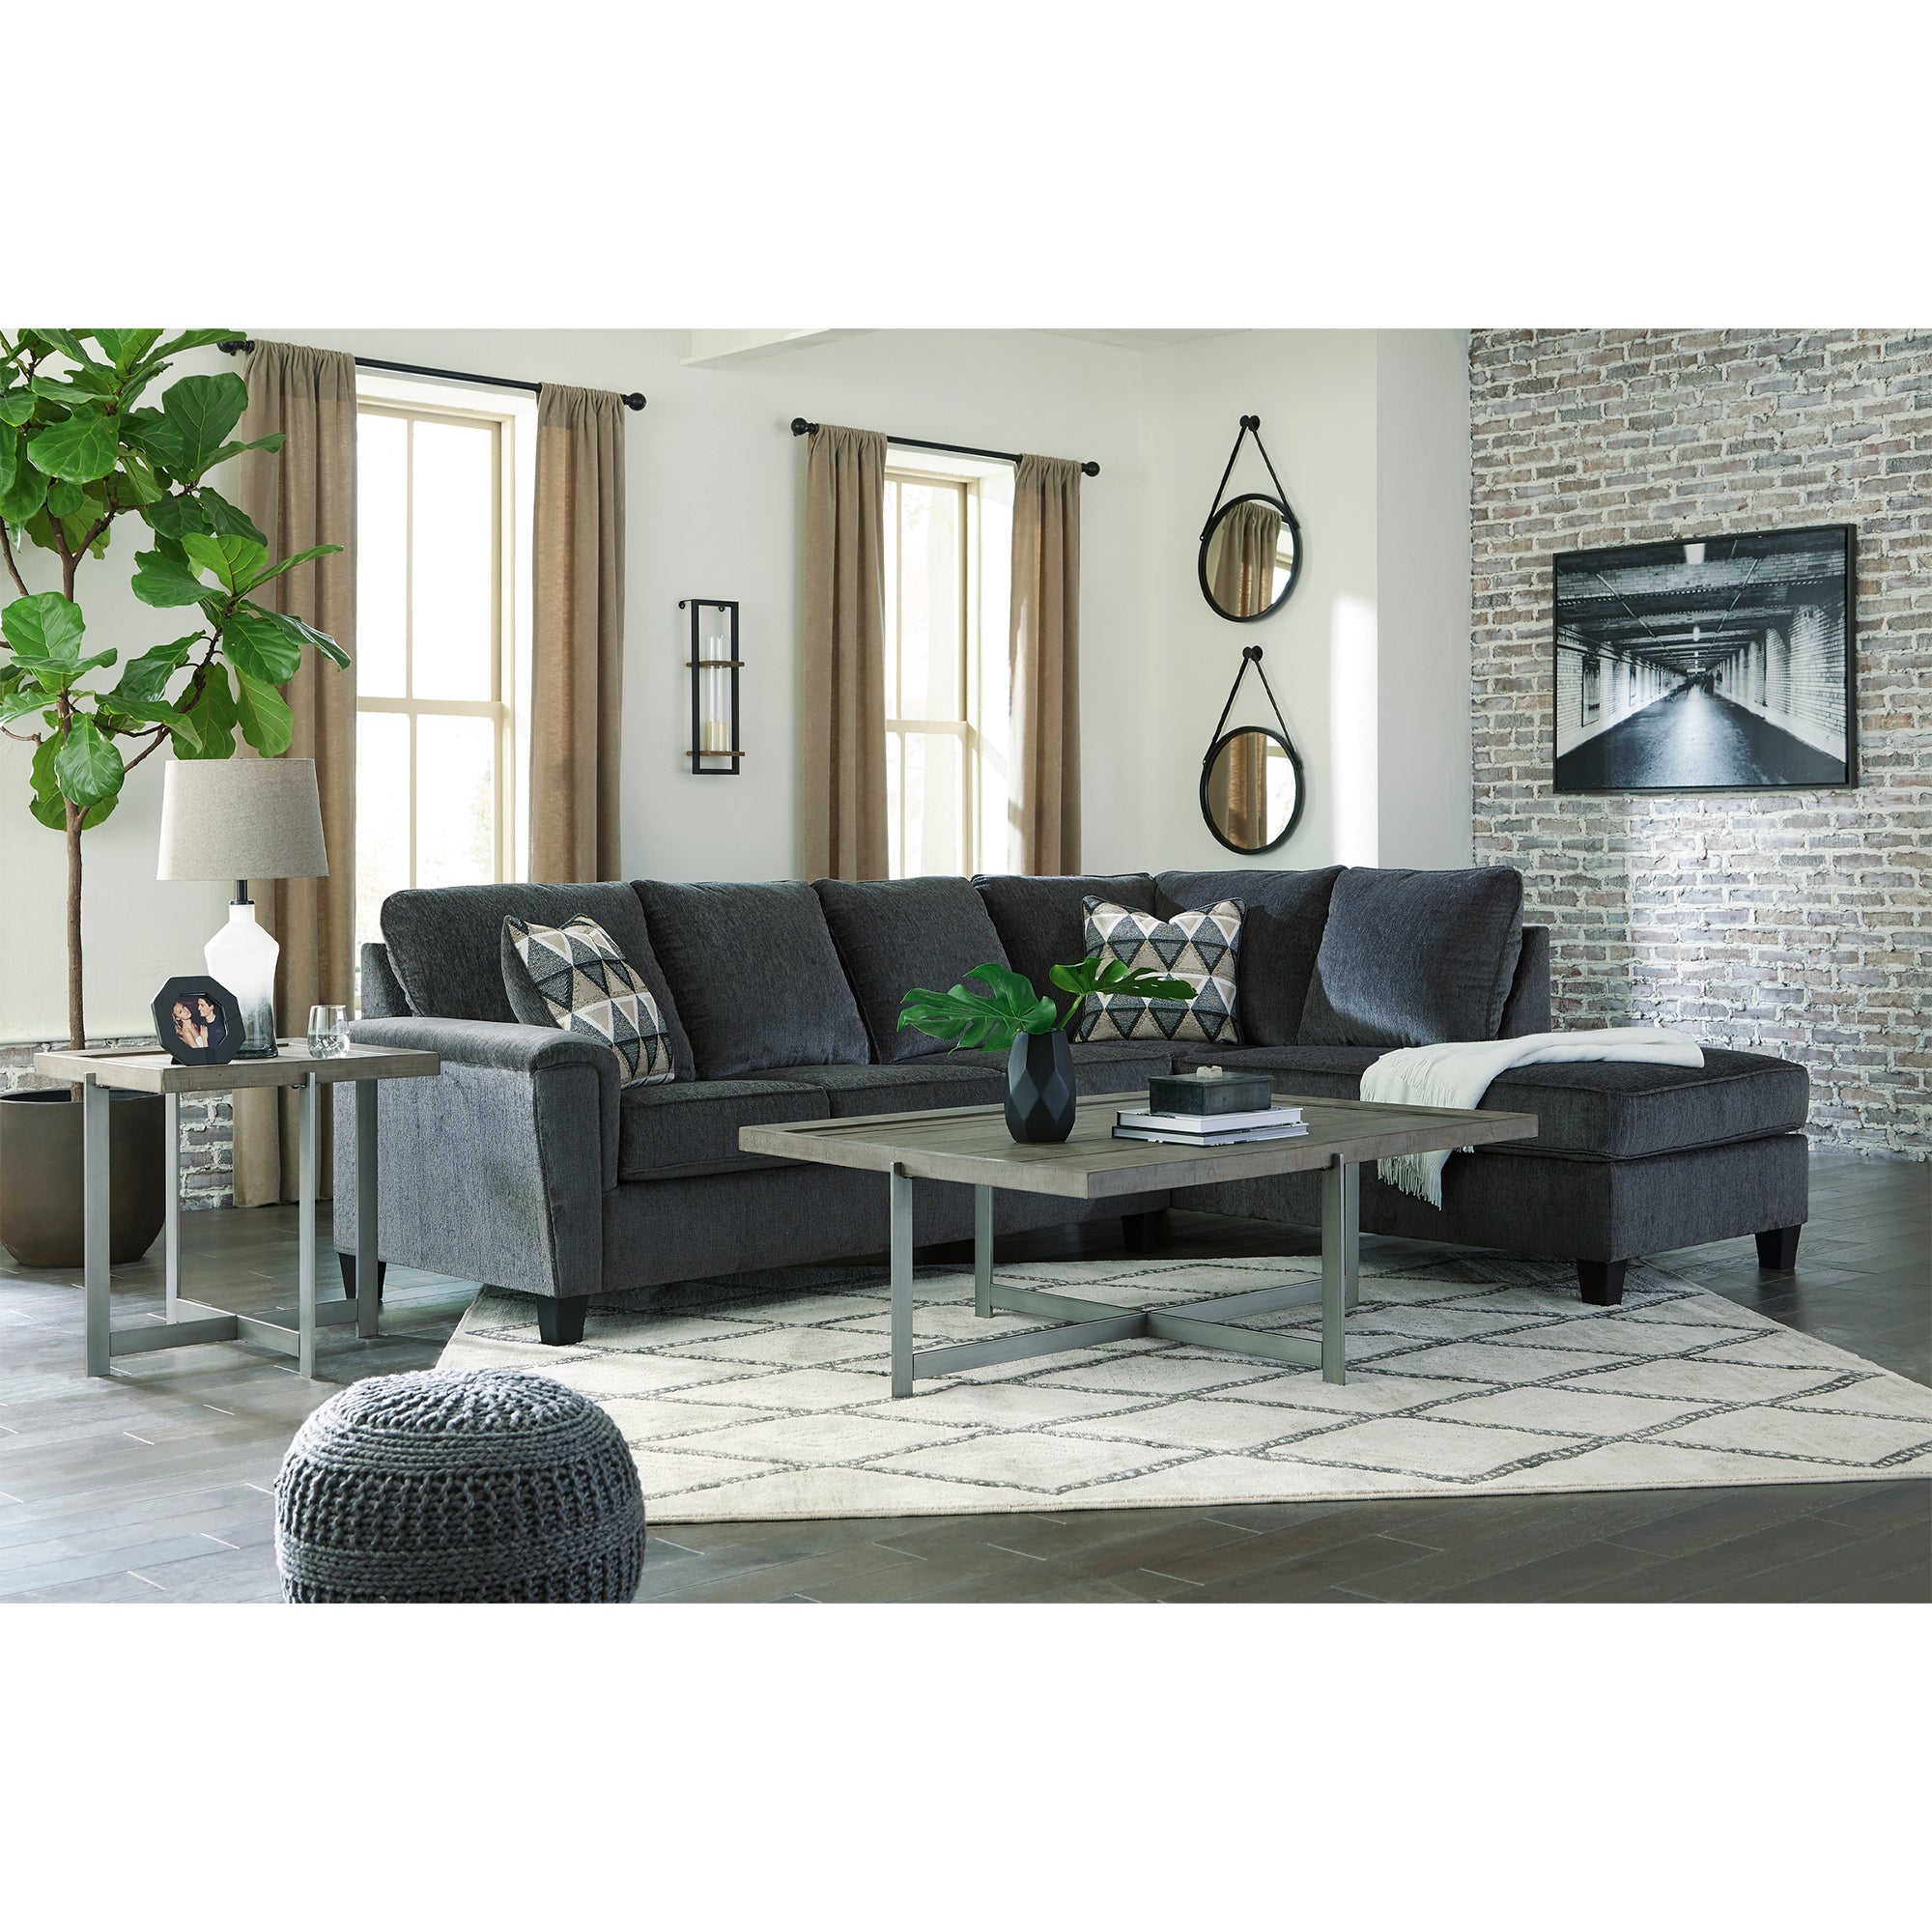 Abinger 2-Piece Sectional with Chaise in Smoke Color